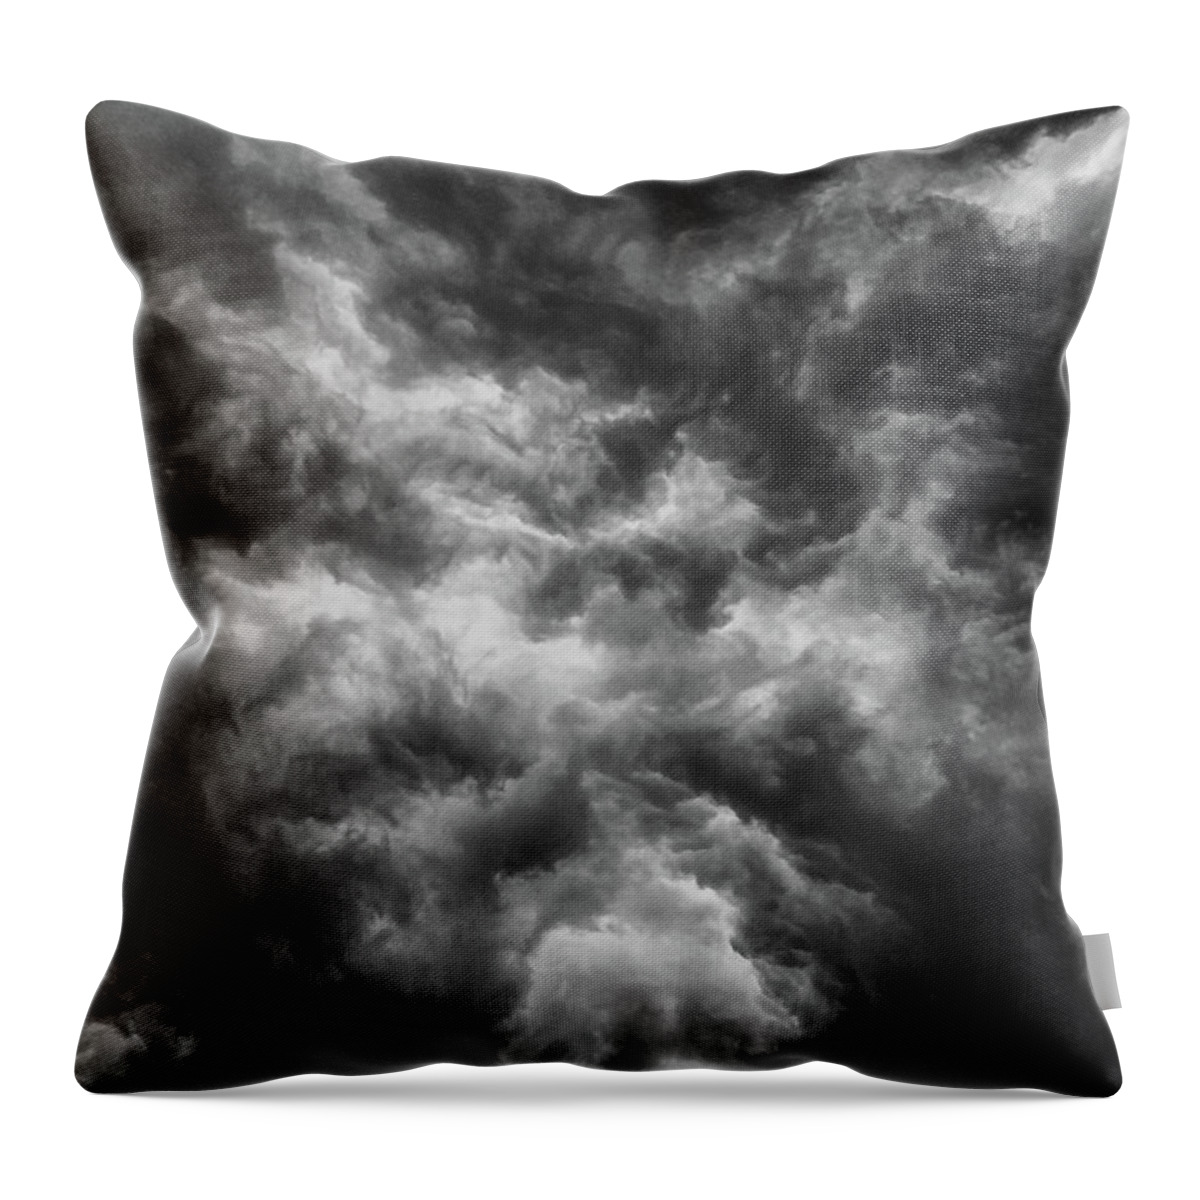 Clouds Throw Pillow featuring the photograph Angry Clouds by Louis Dallara